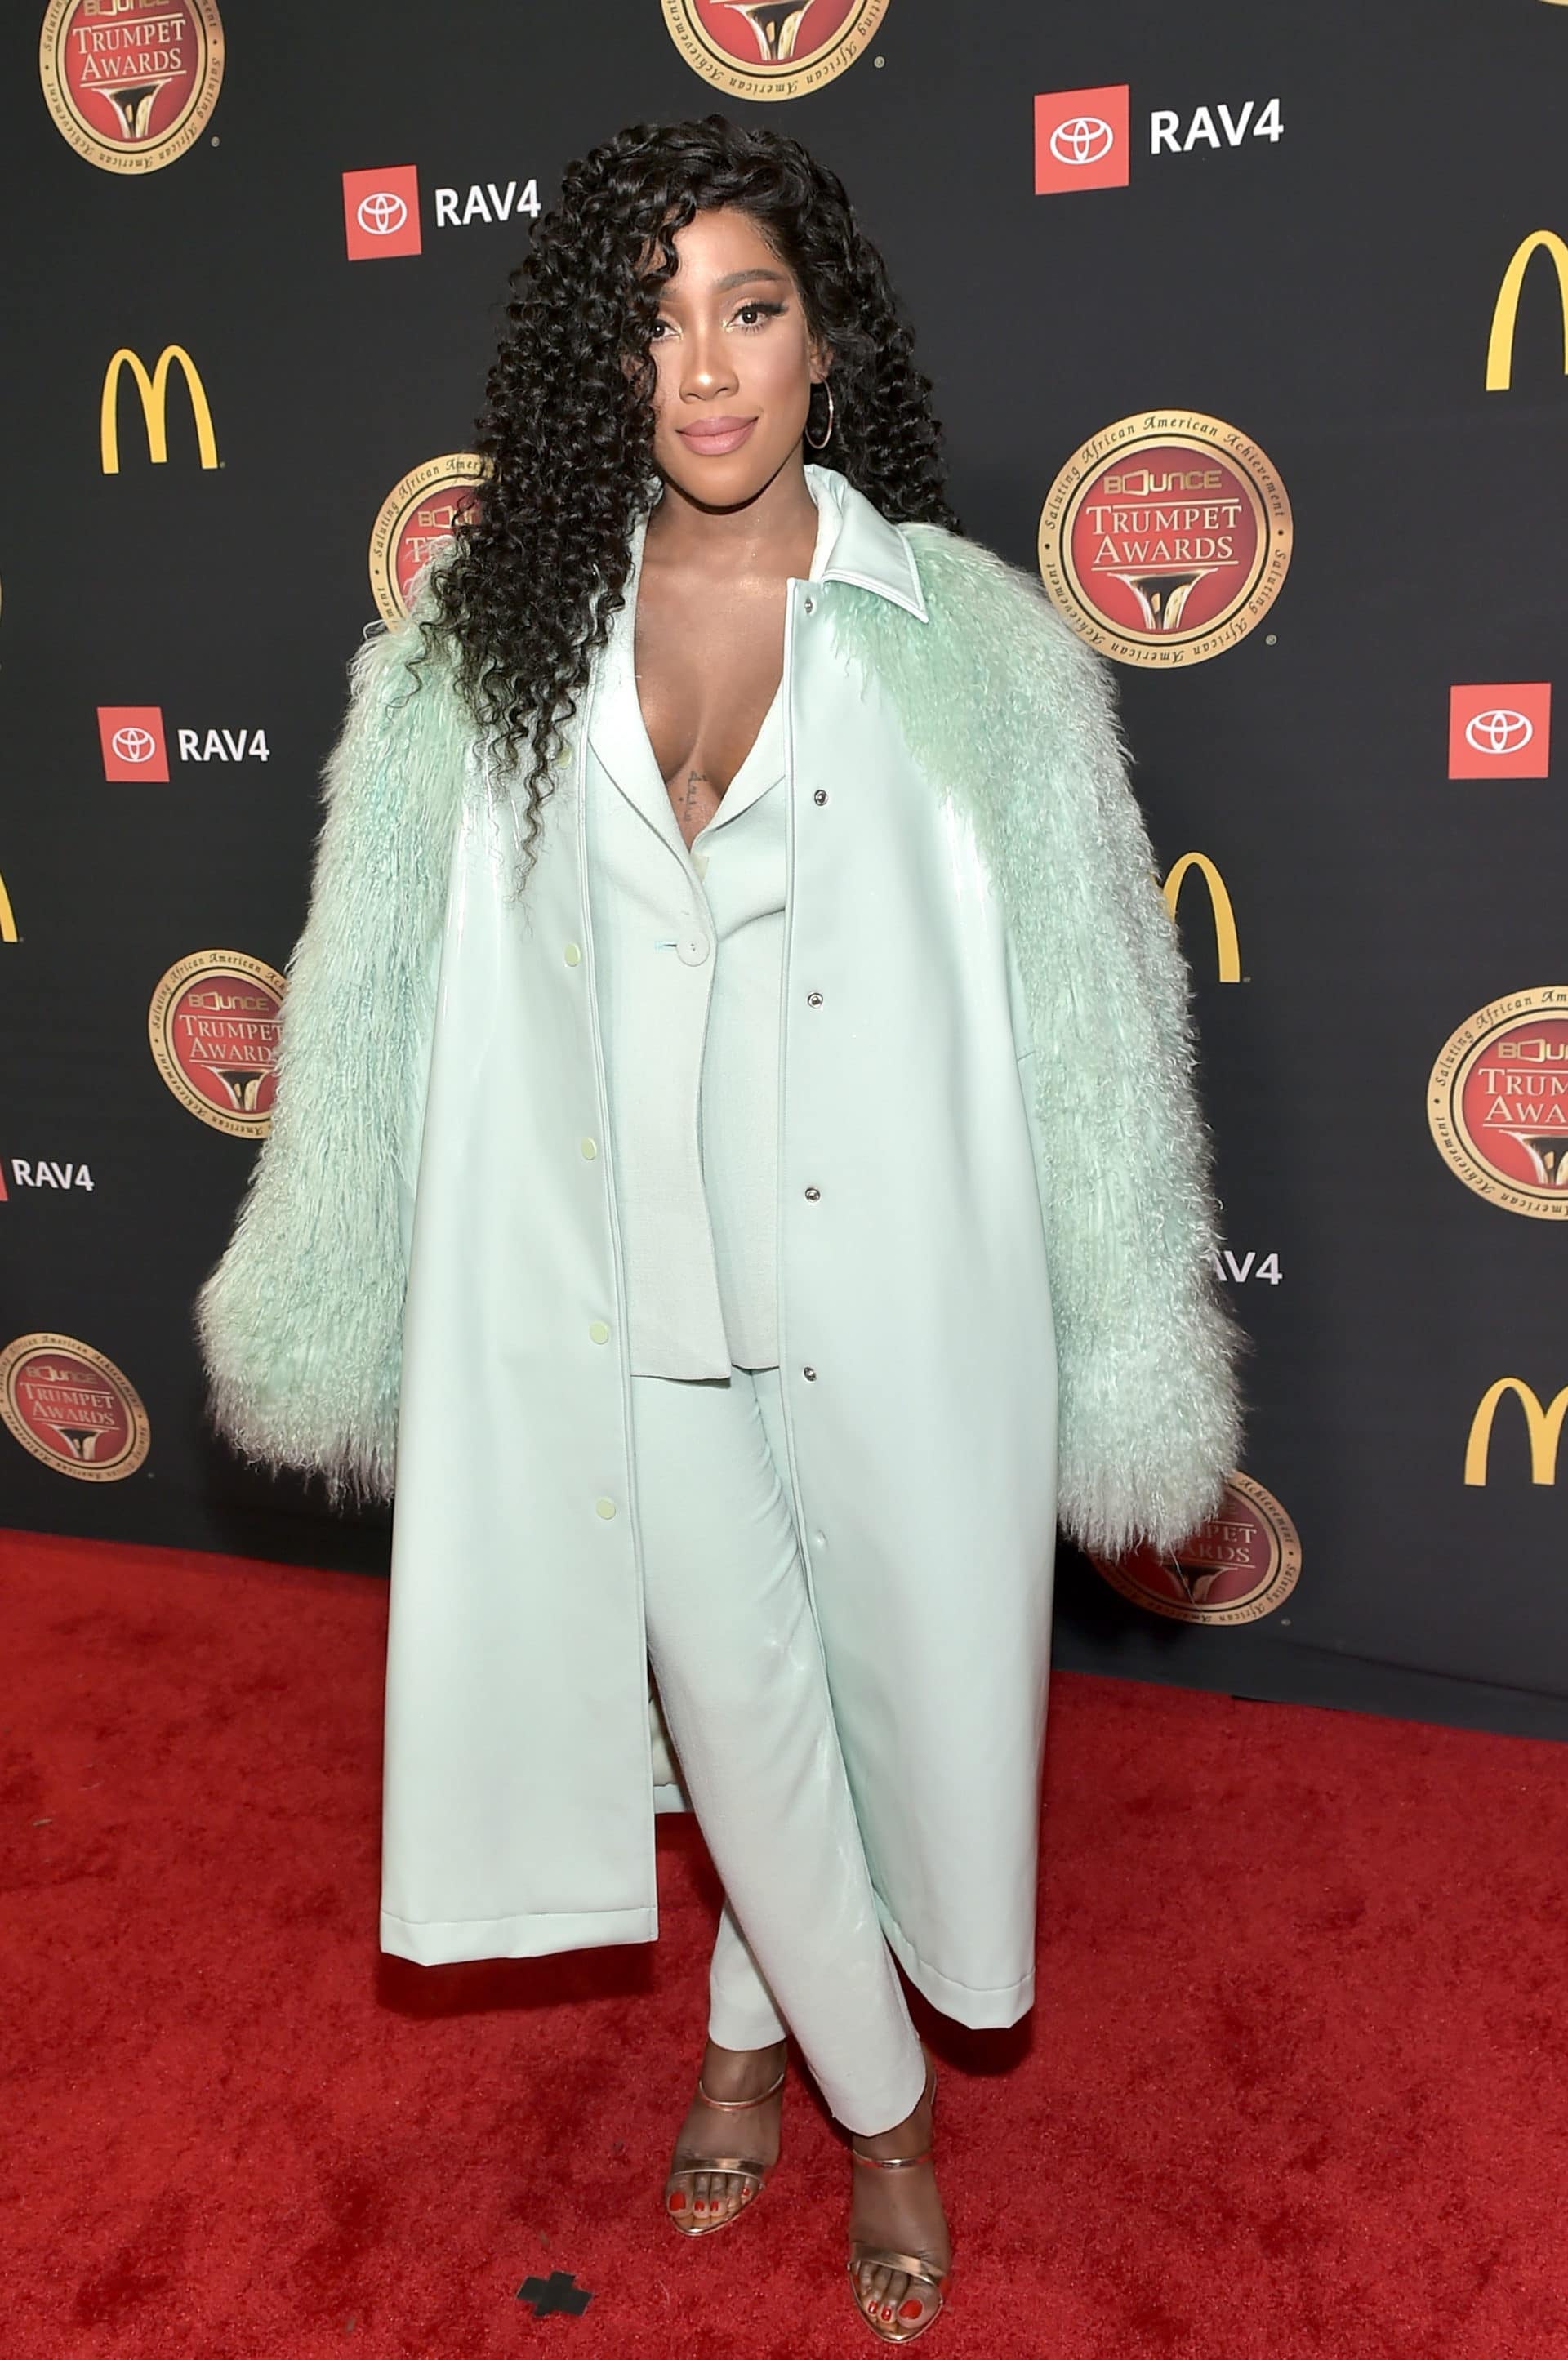 Amanda Seales, Nene Leakes, Taraji P. Henson And More Celebs Out And About